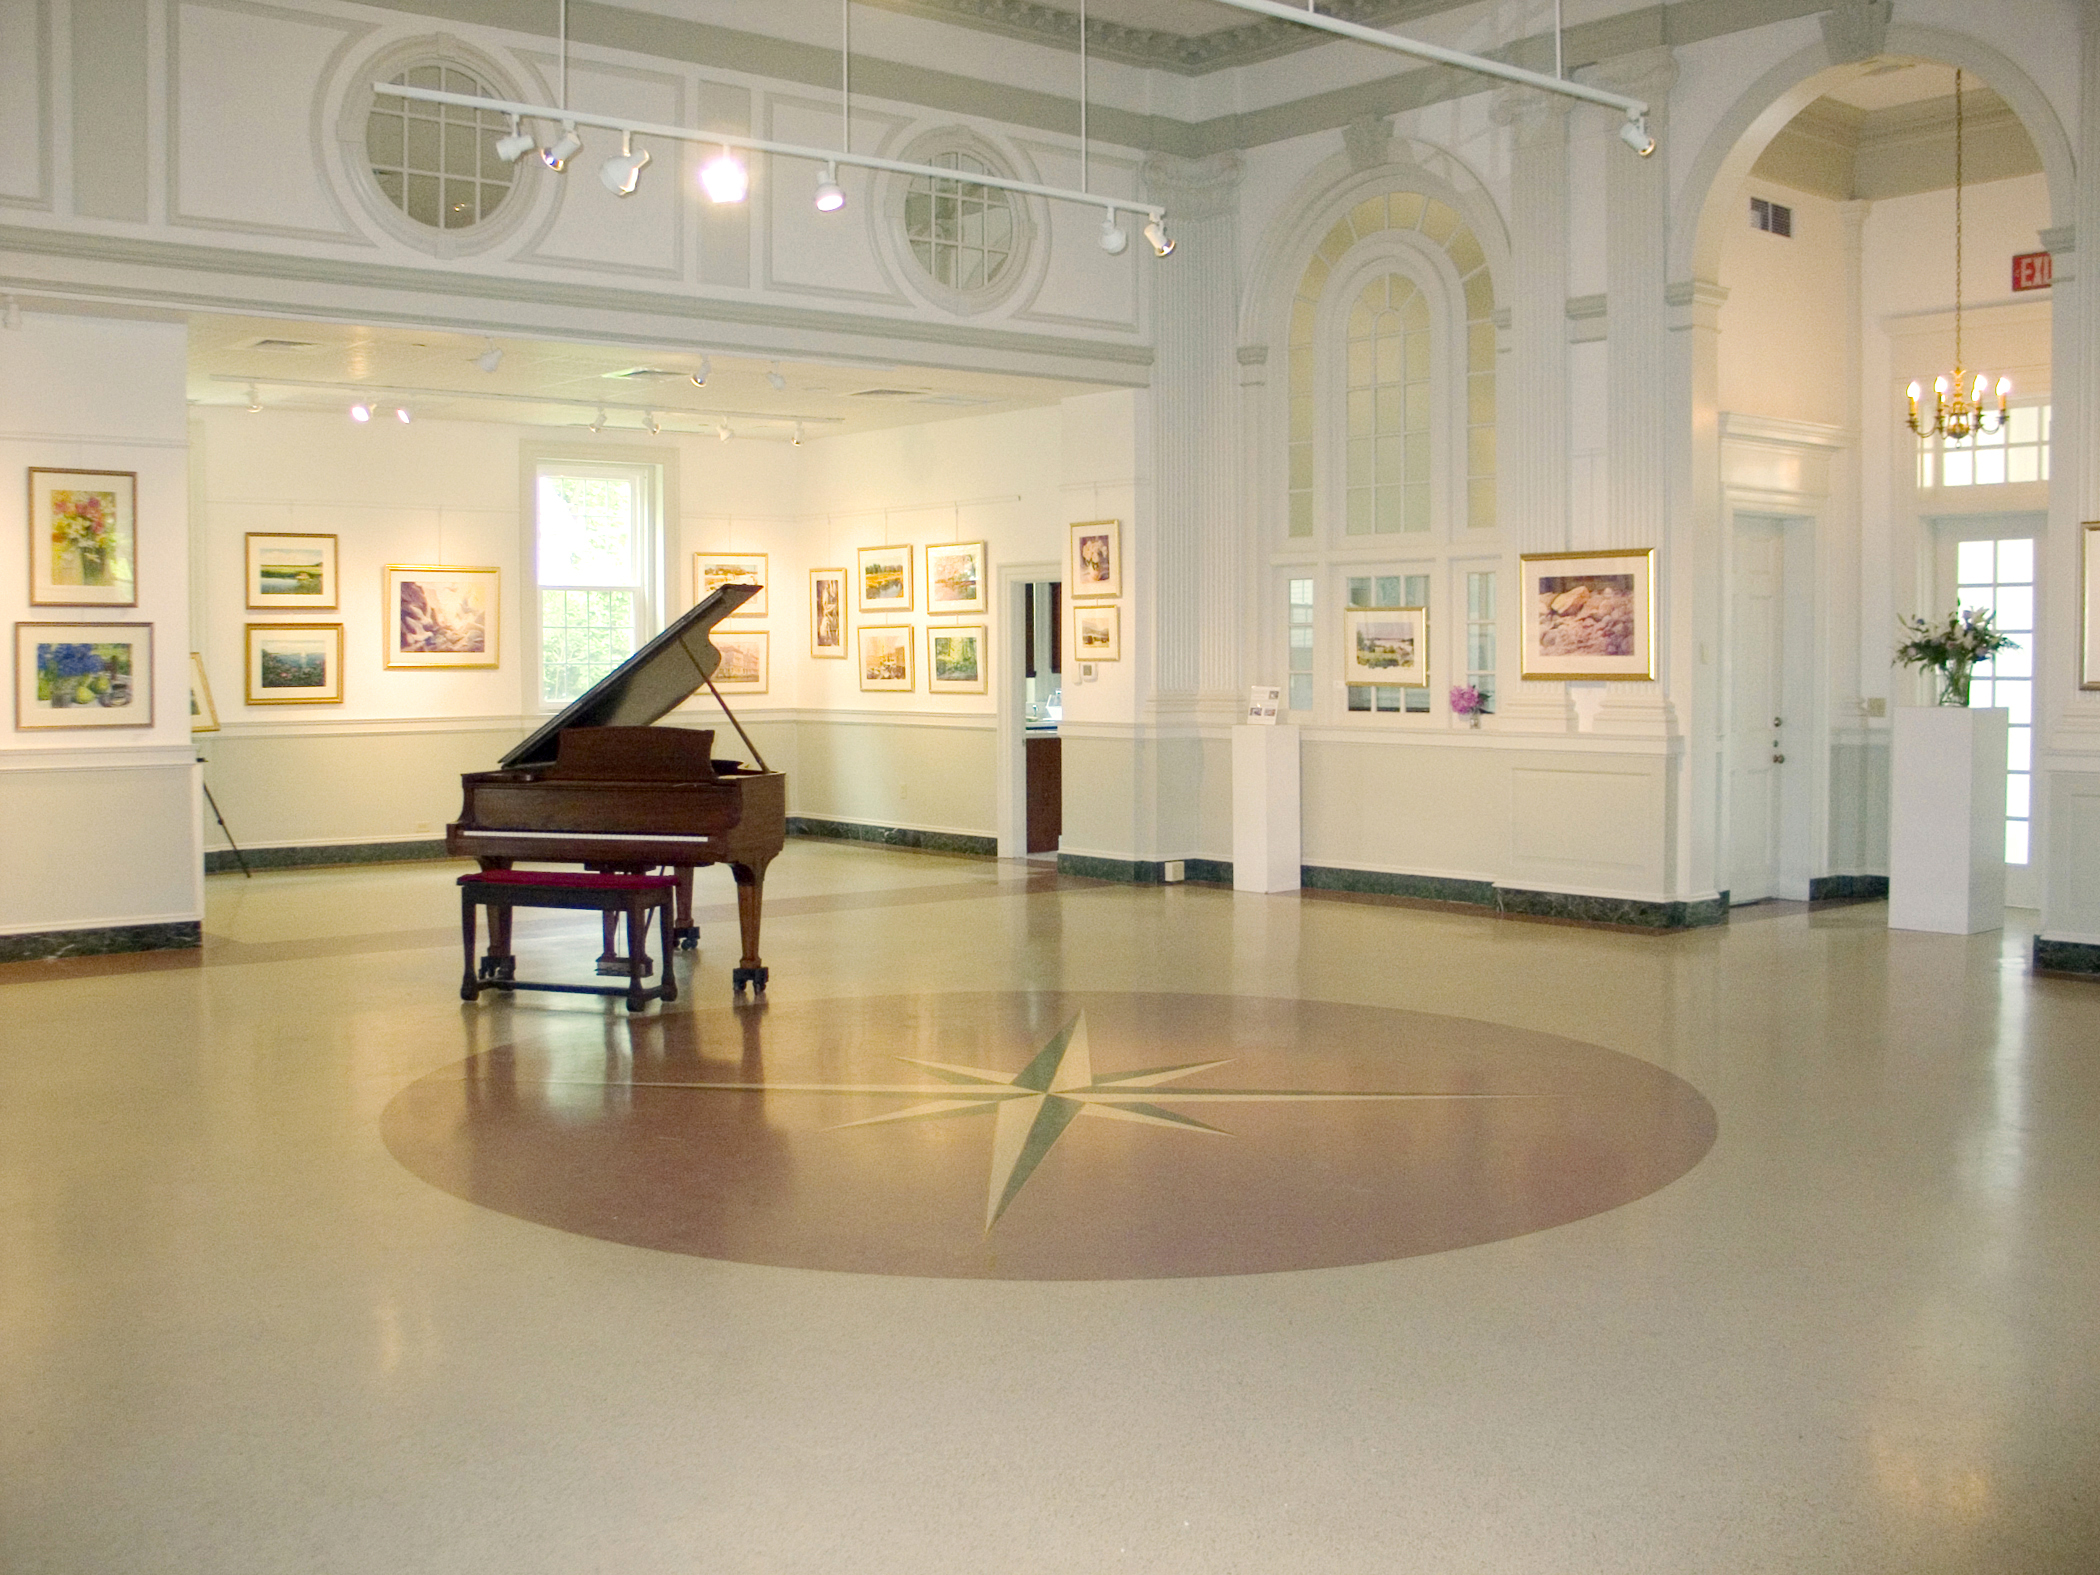 Interior of the cultural center of cape code with a big open space and a piano in the center.